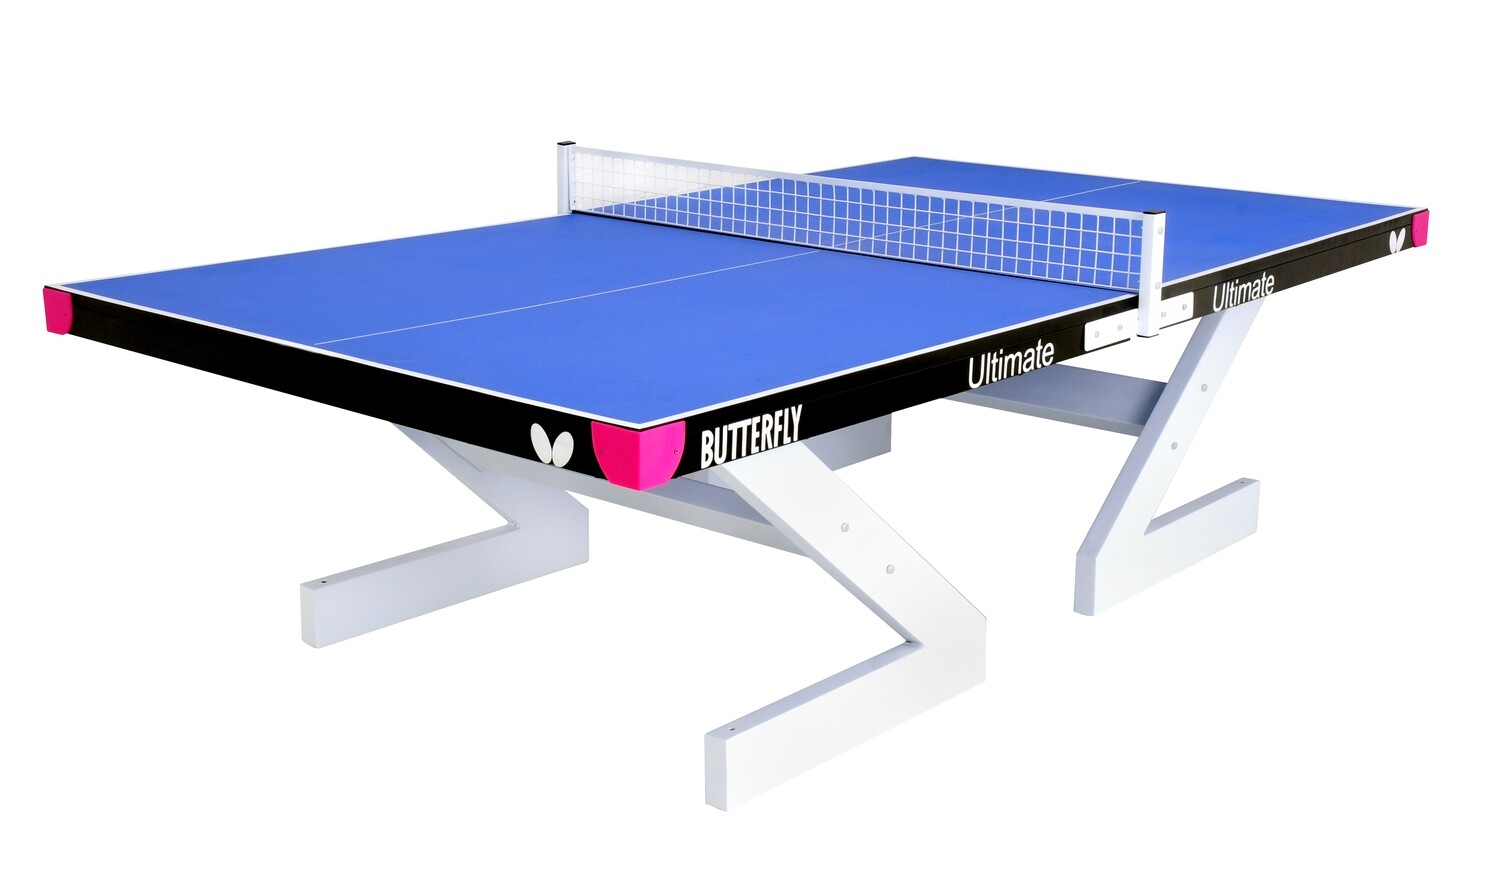 Butterfly Ultimate Outdoor Table Tennis Table, Colour: Blue